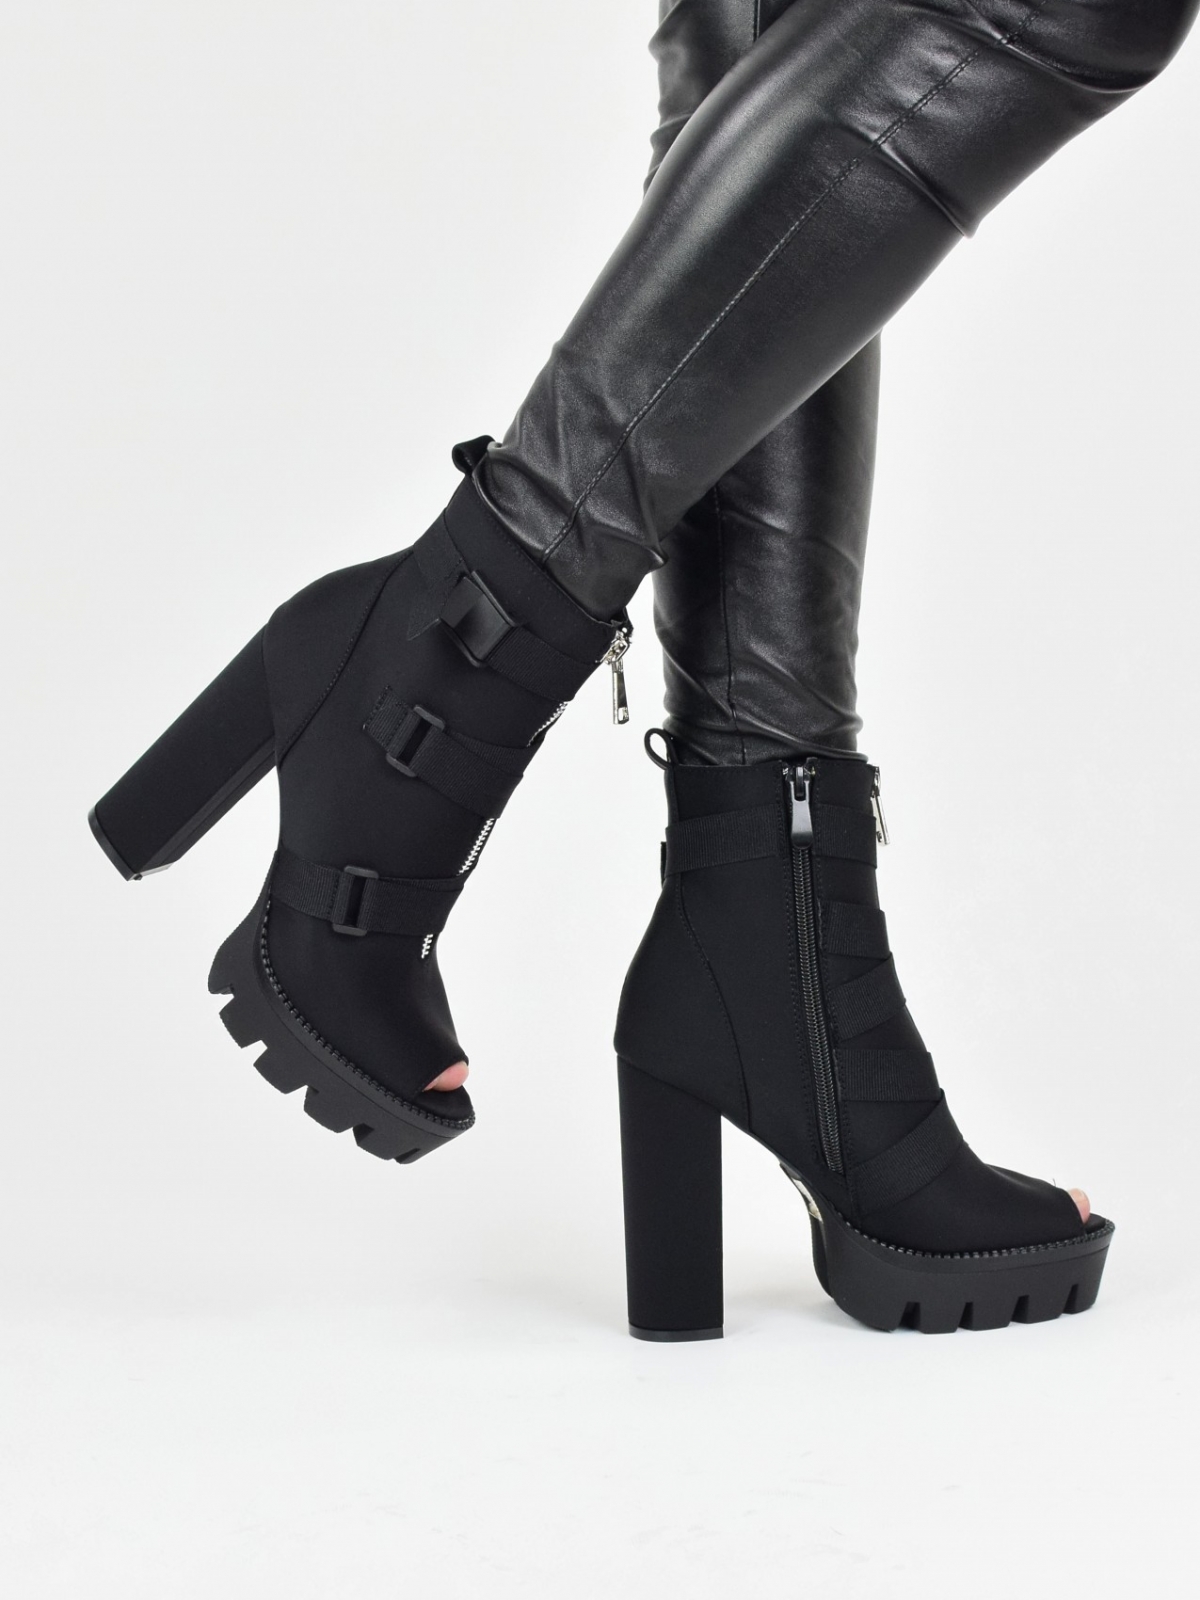 Women's high heeled ankle boots with open toe in black